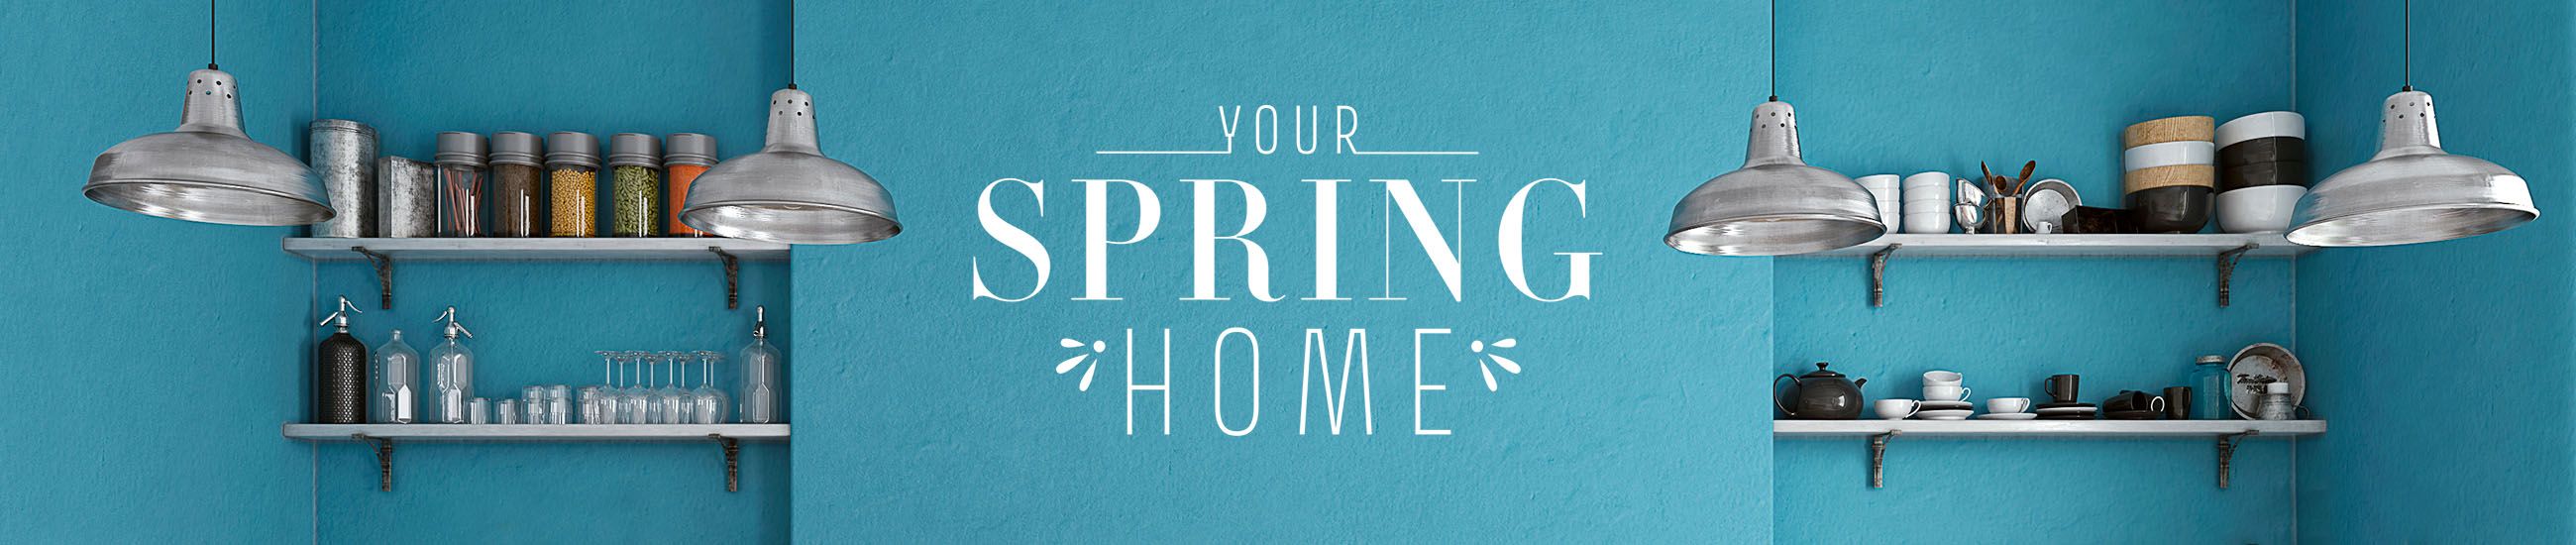 Your Spring Home